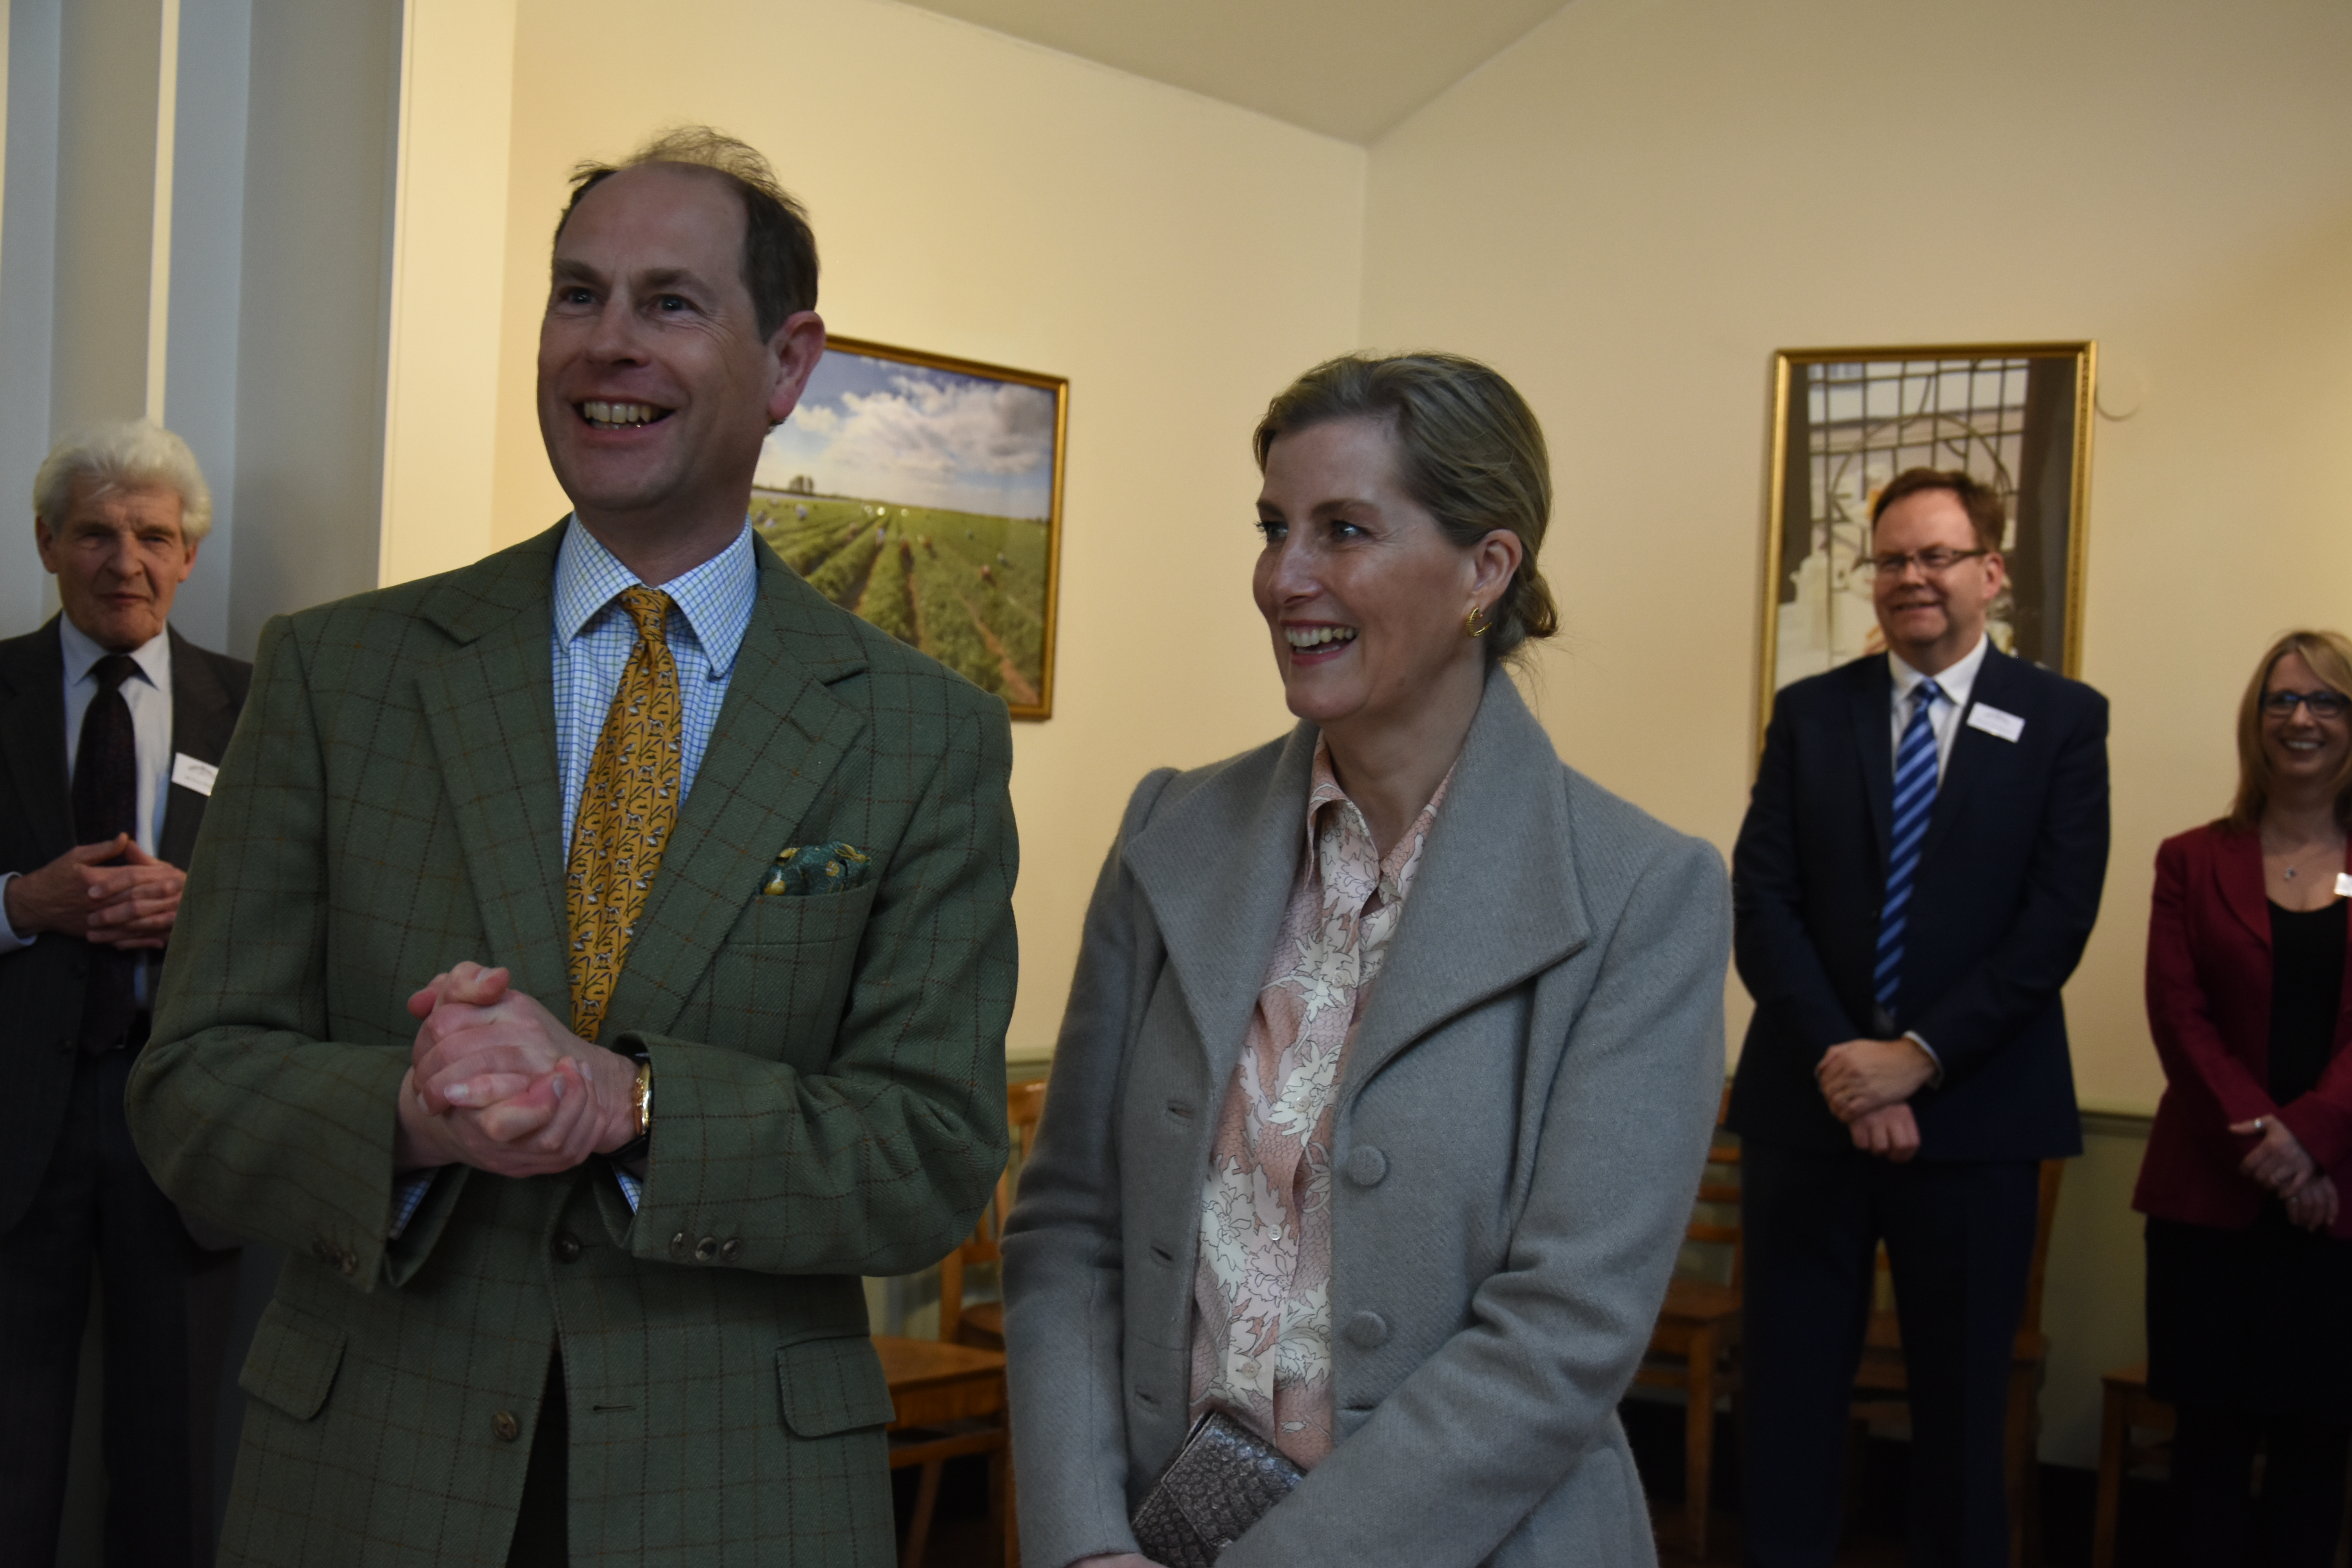 The Earl and Countess of Wessex visit the Tiptree jam factory 